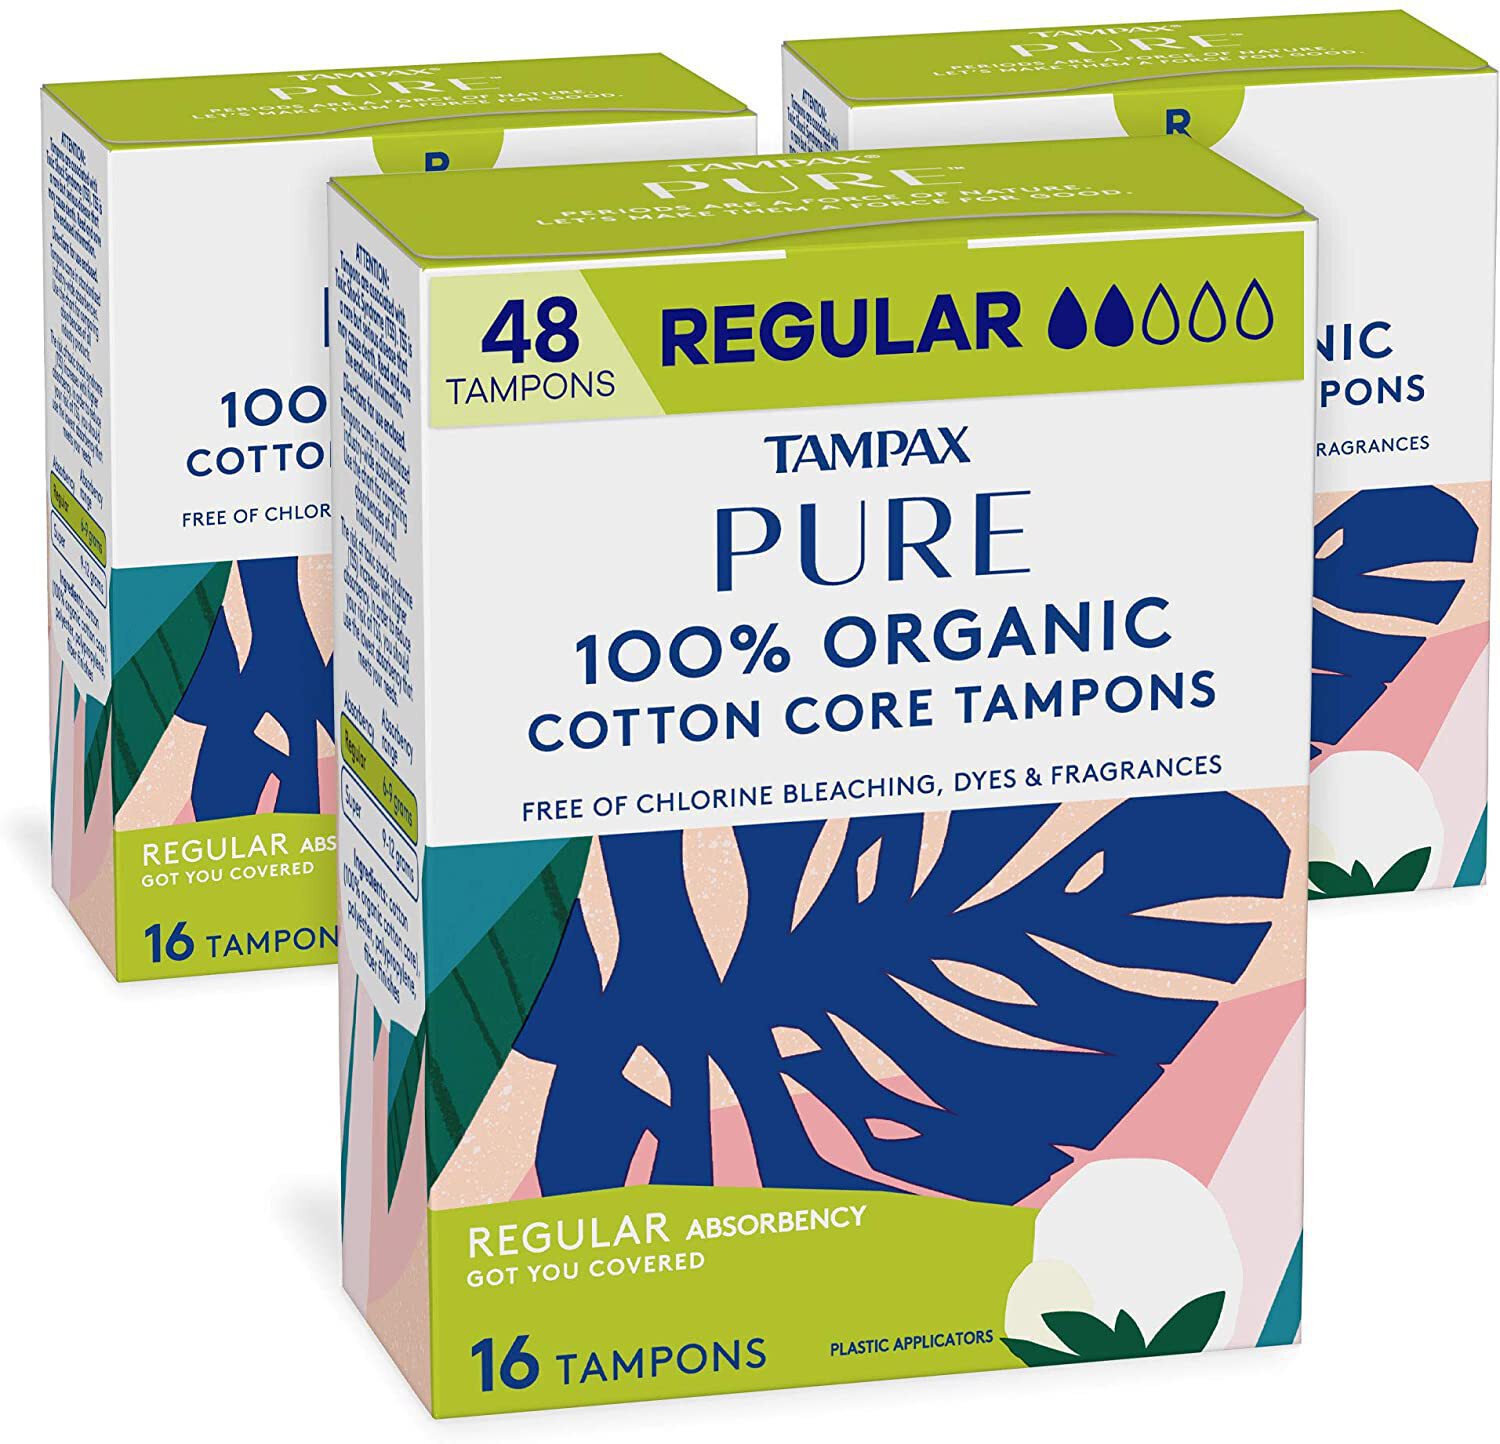 Tampax Pure